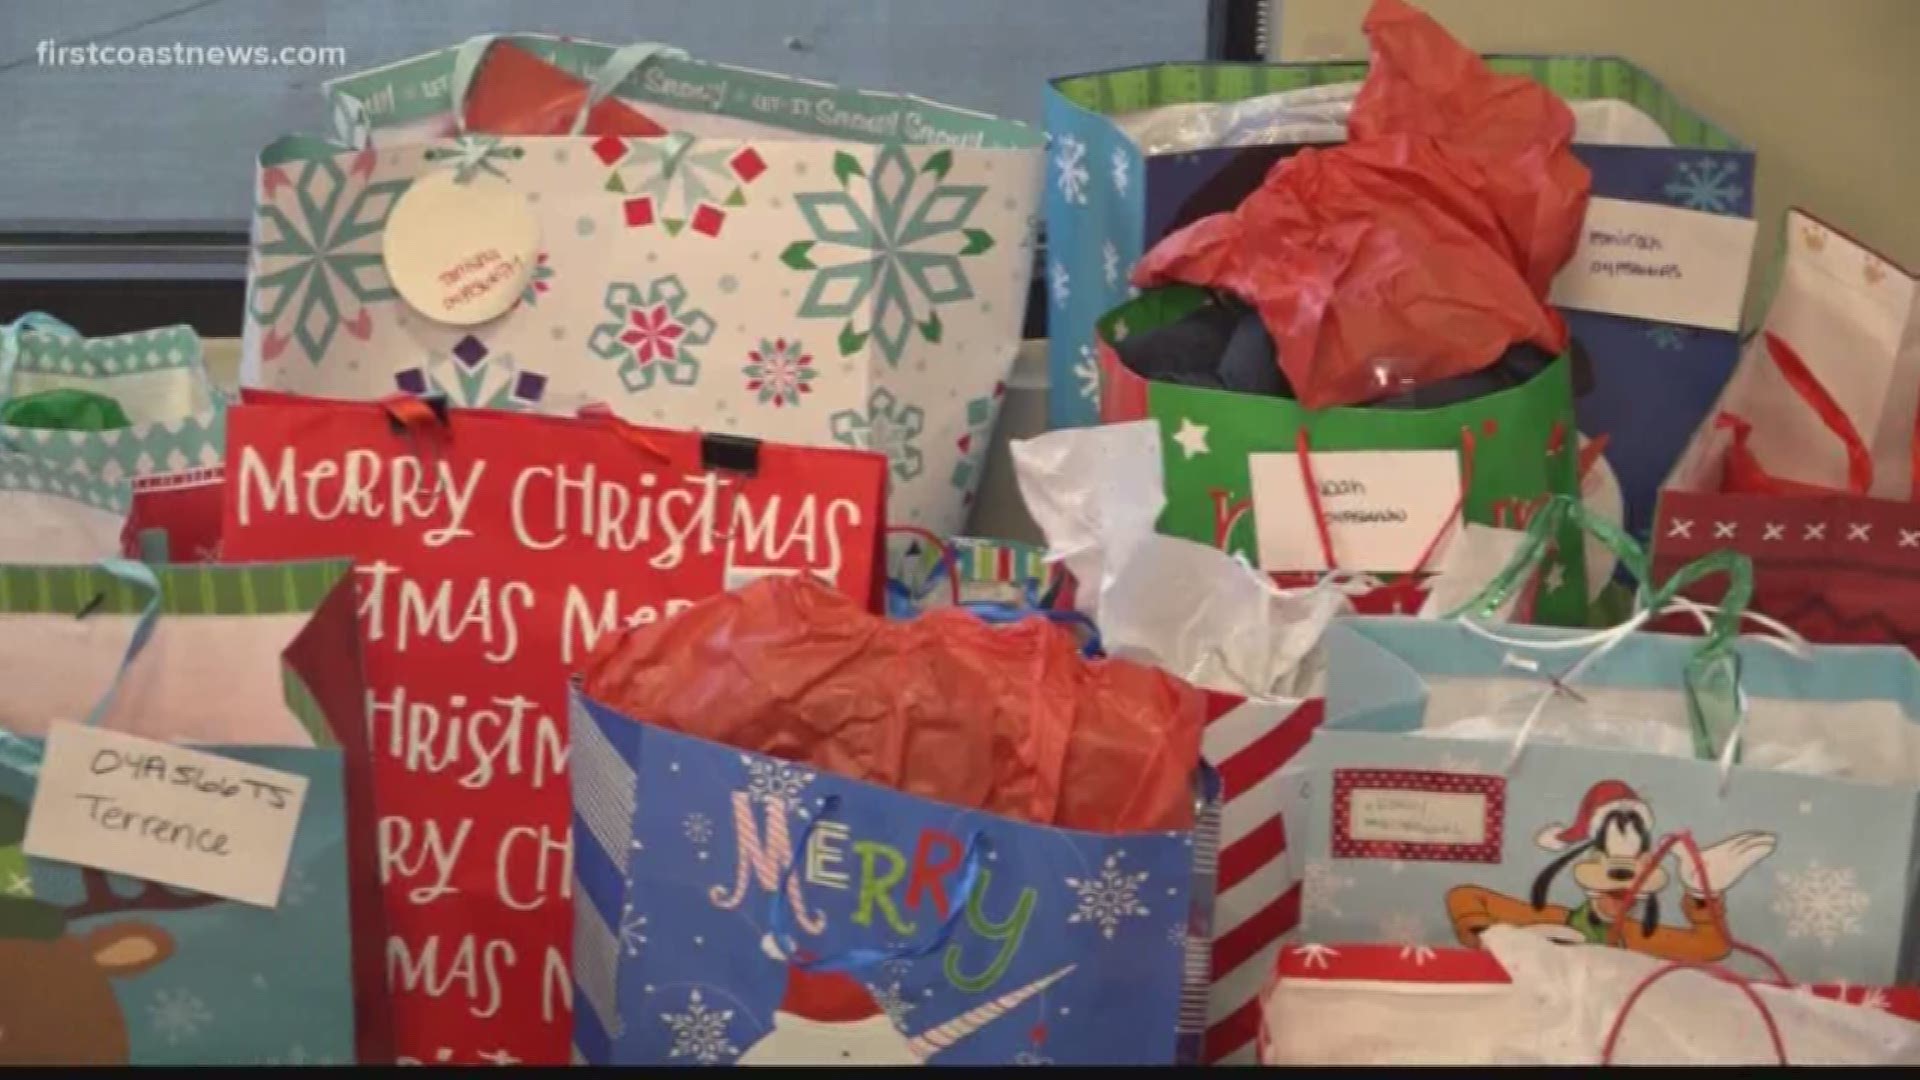 JFCS says if the community didn't step up to help, man kids wouldn't receive presents over the holidays.